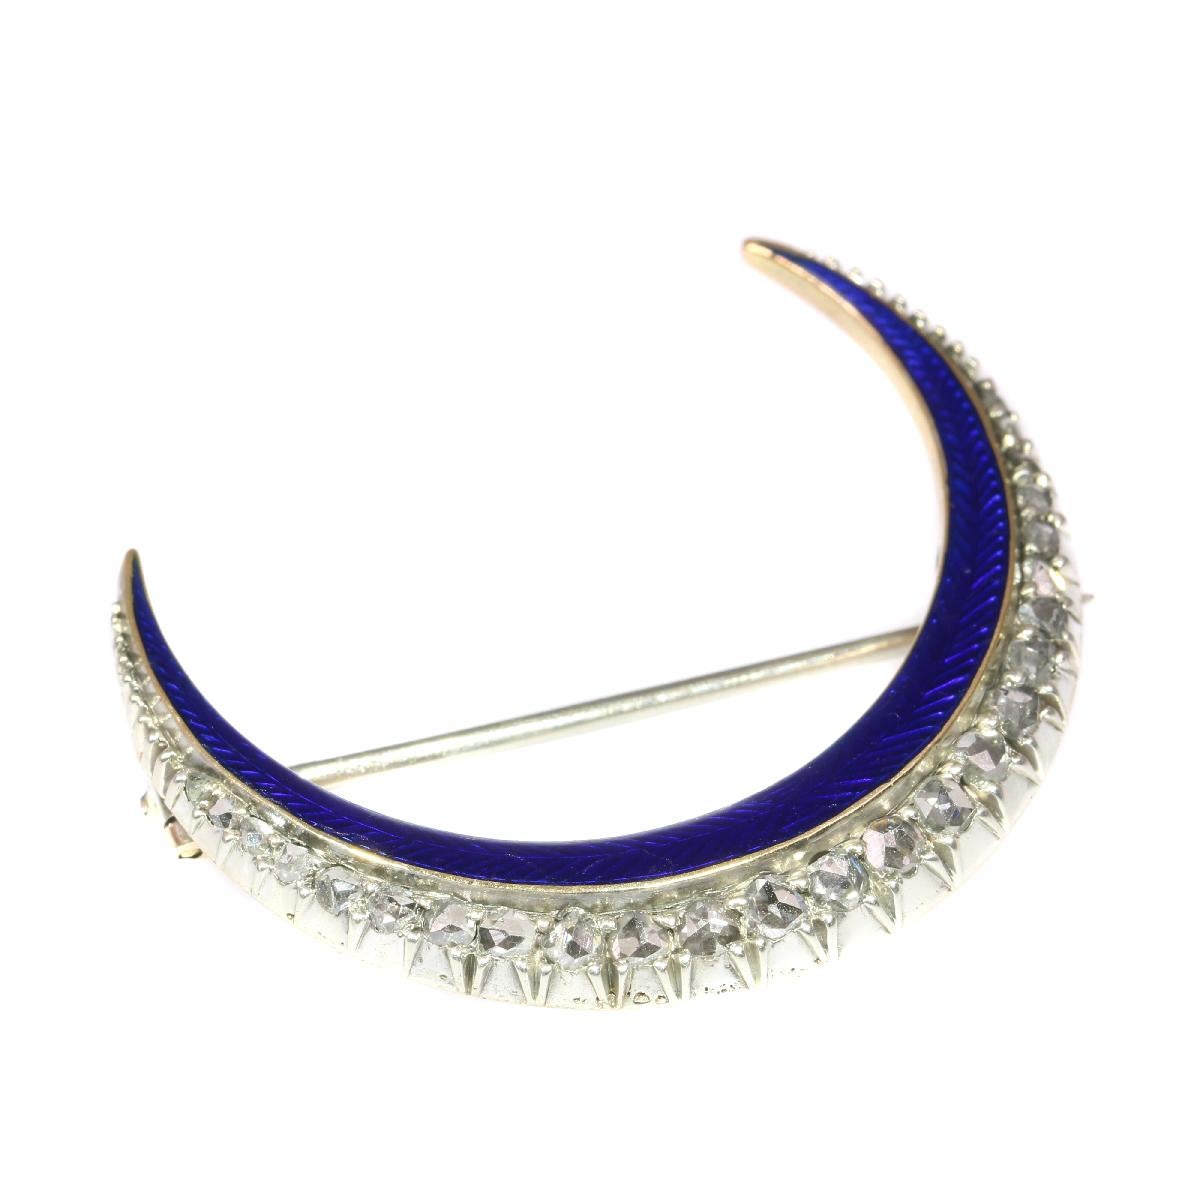 Women's or Men's Victorian Brooch Crescent Moon with Blue Enamel and Rose Cut Diamonds